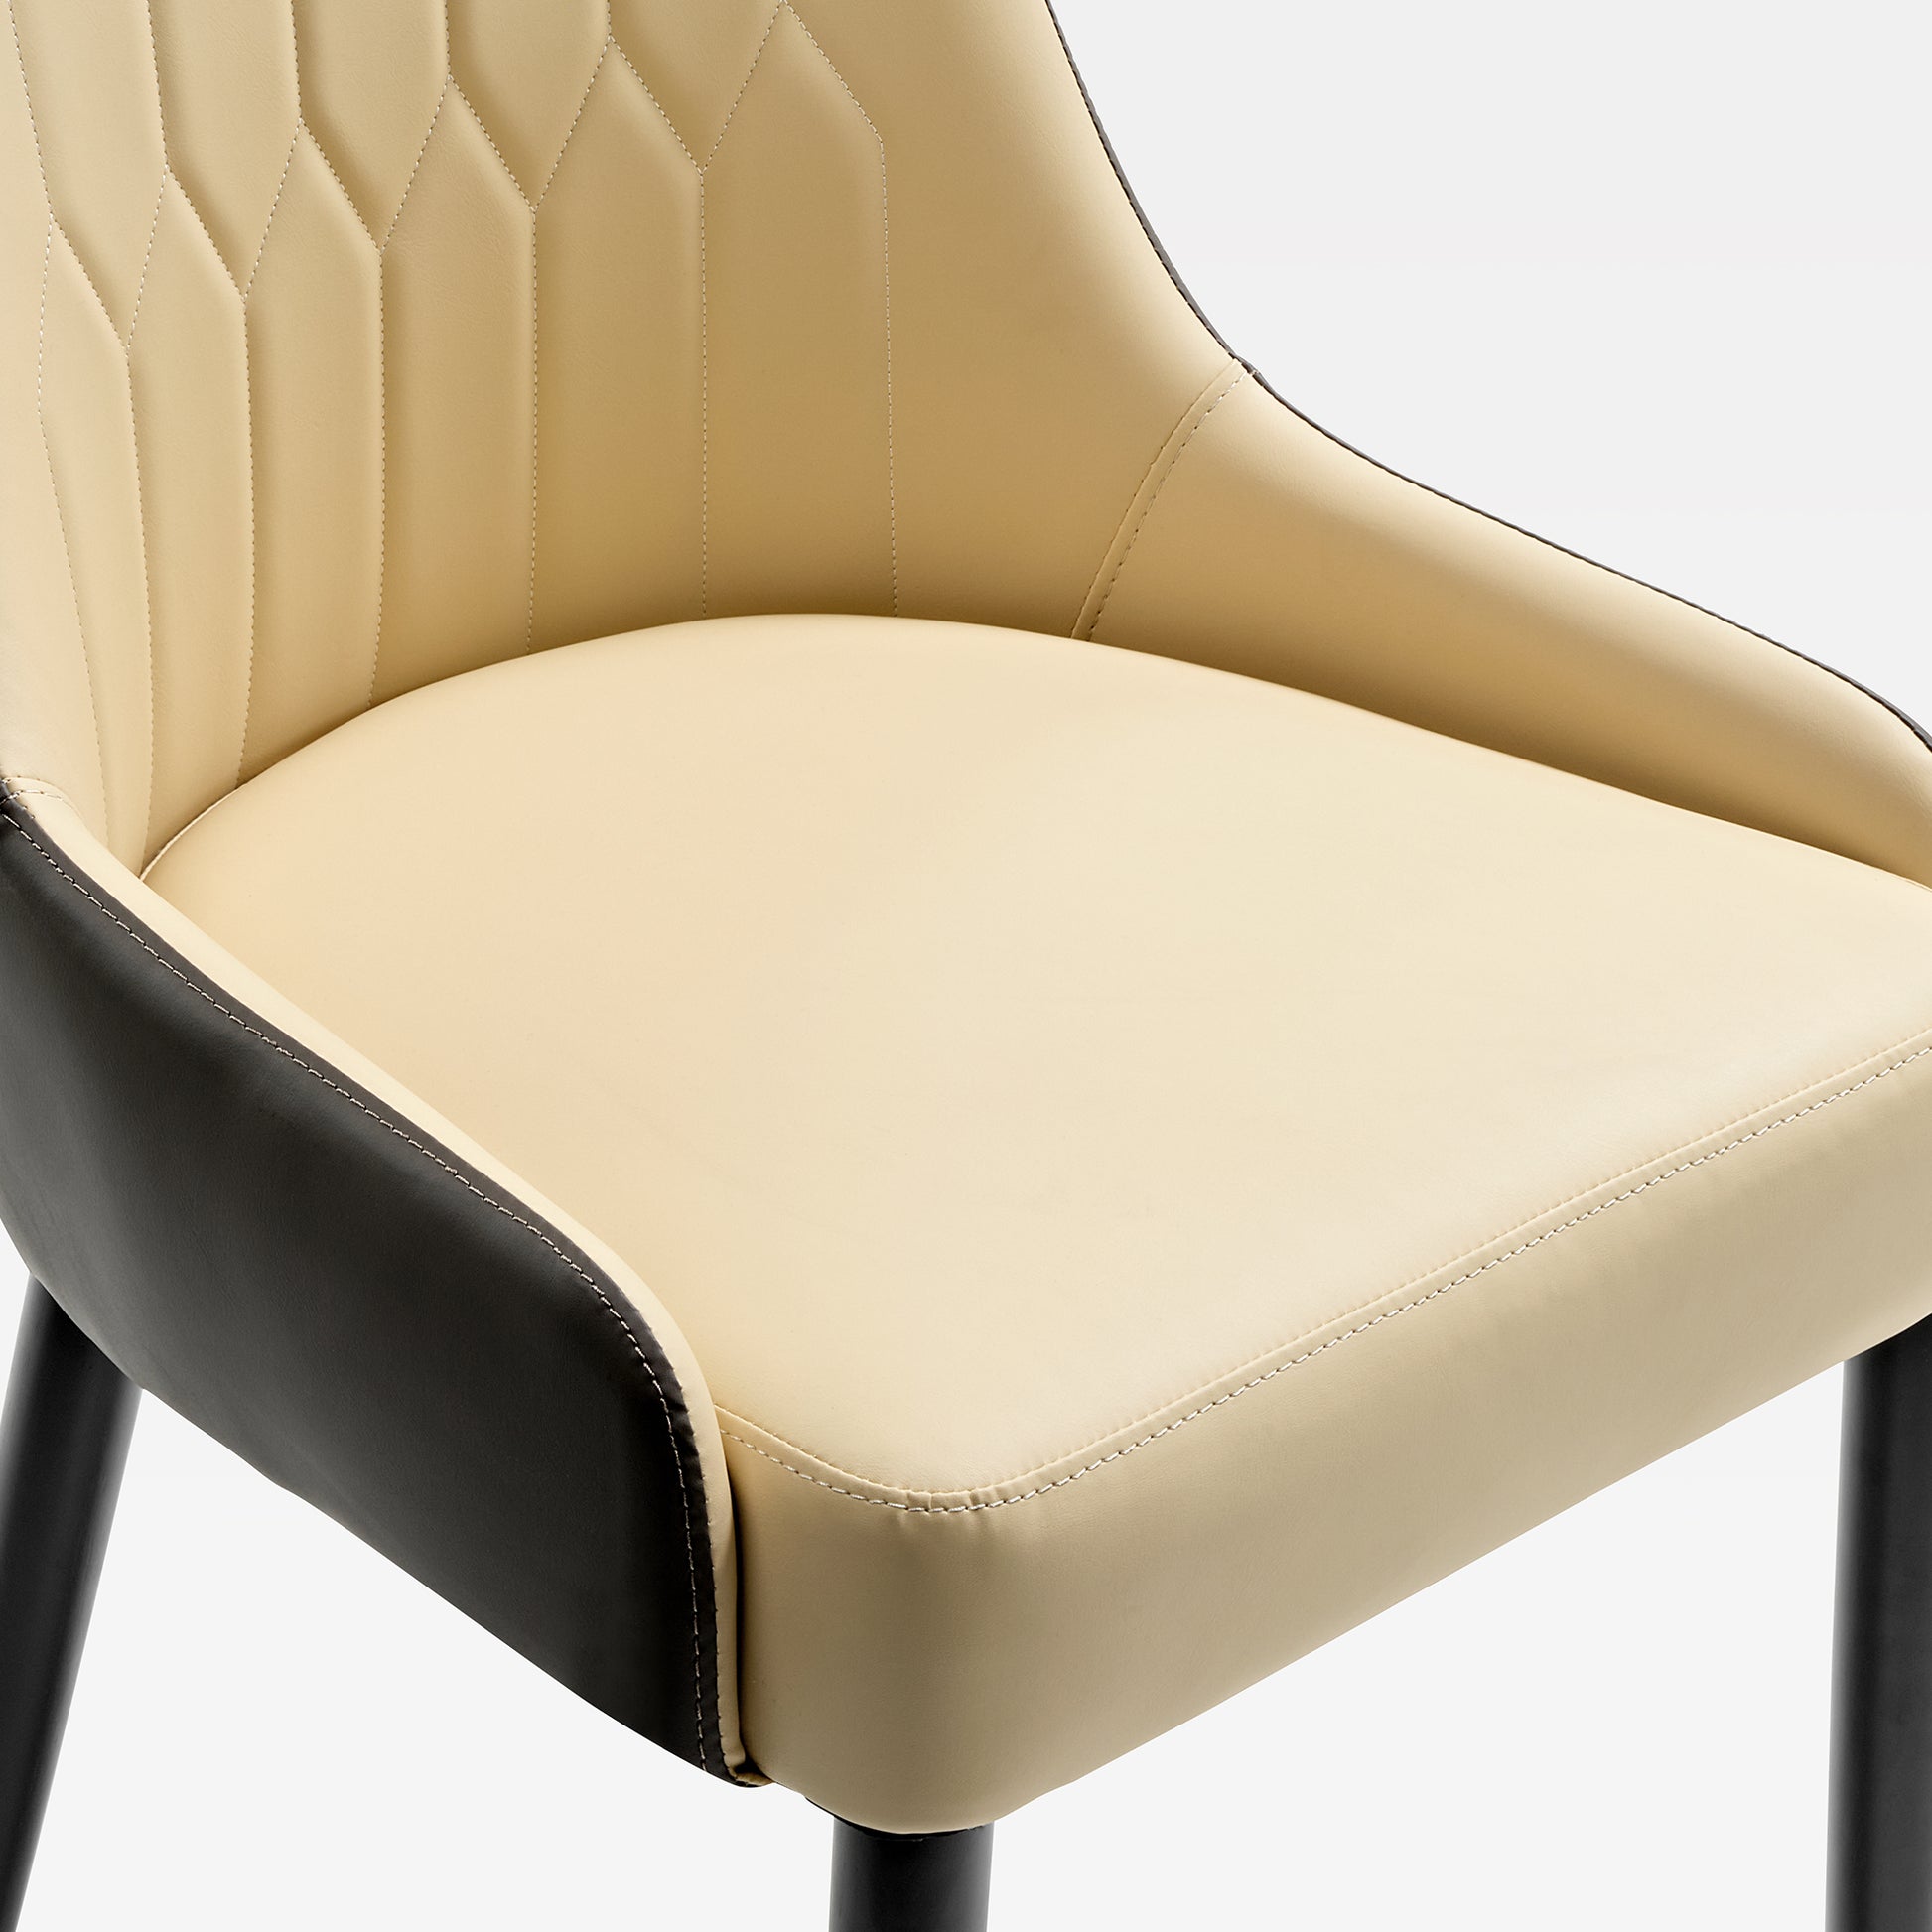 Eureka Dining Chair with Deep Seat, Off-white